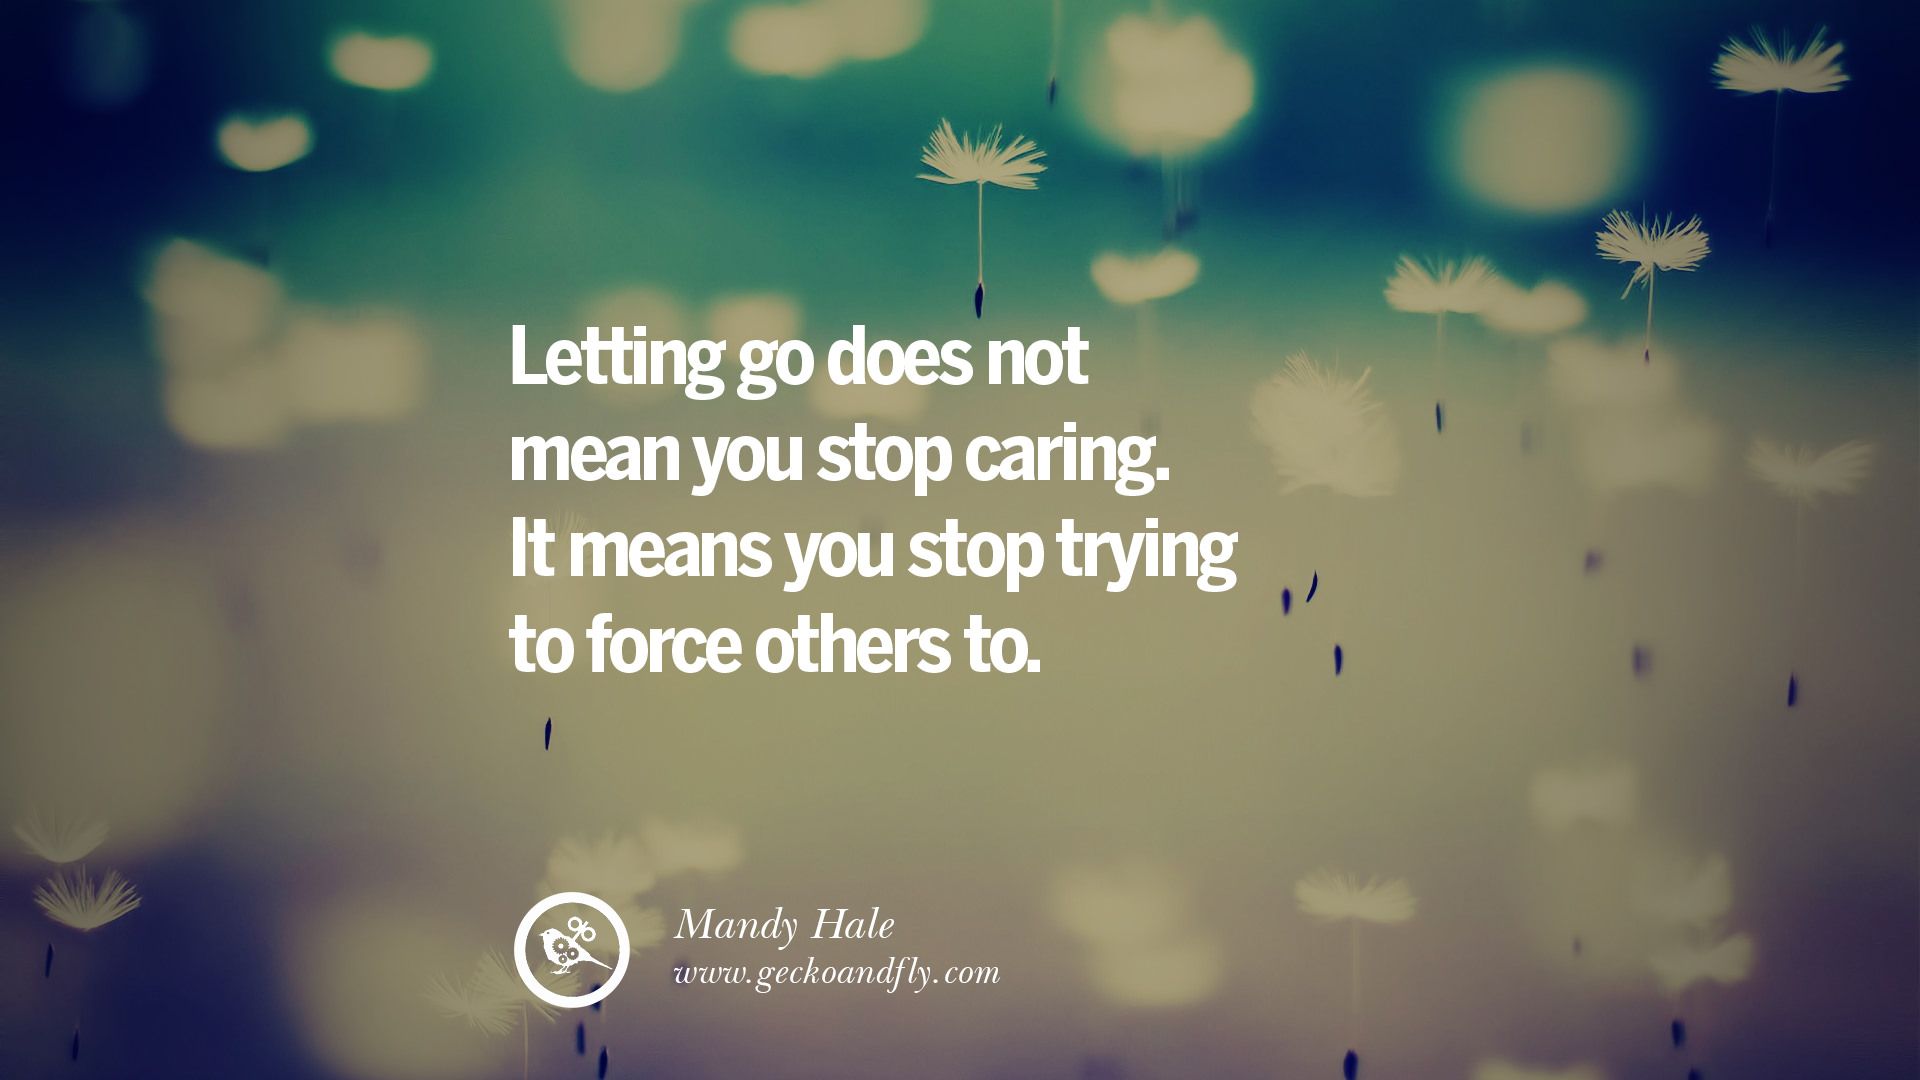 Quotes for Letting Go Of someone You Love. Love quotes collection